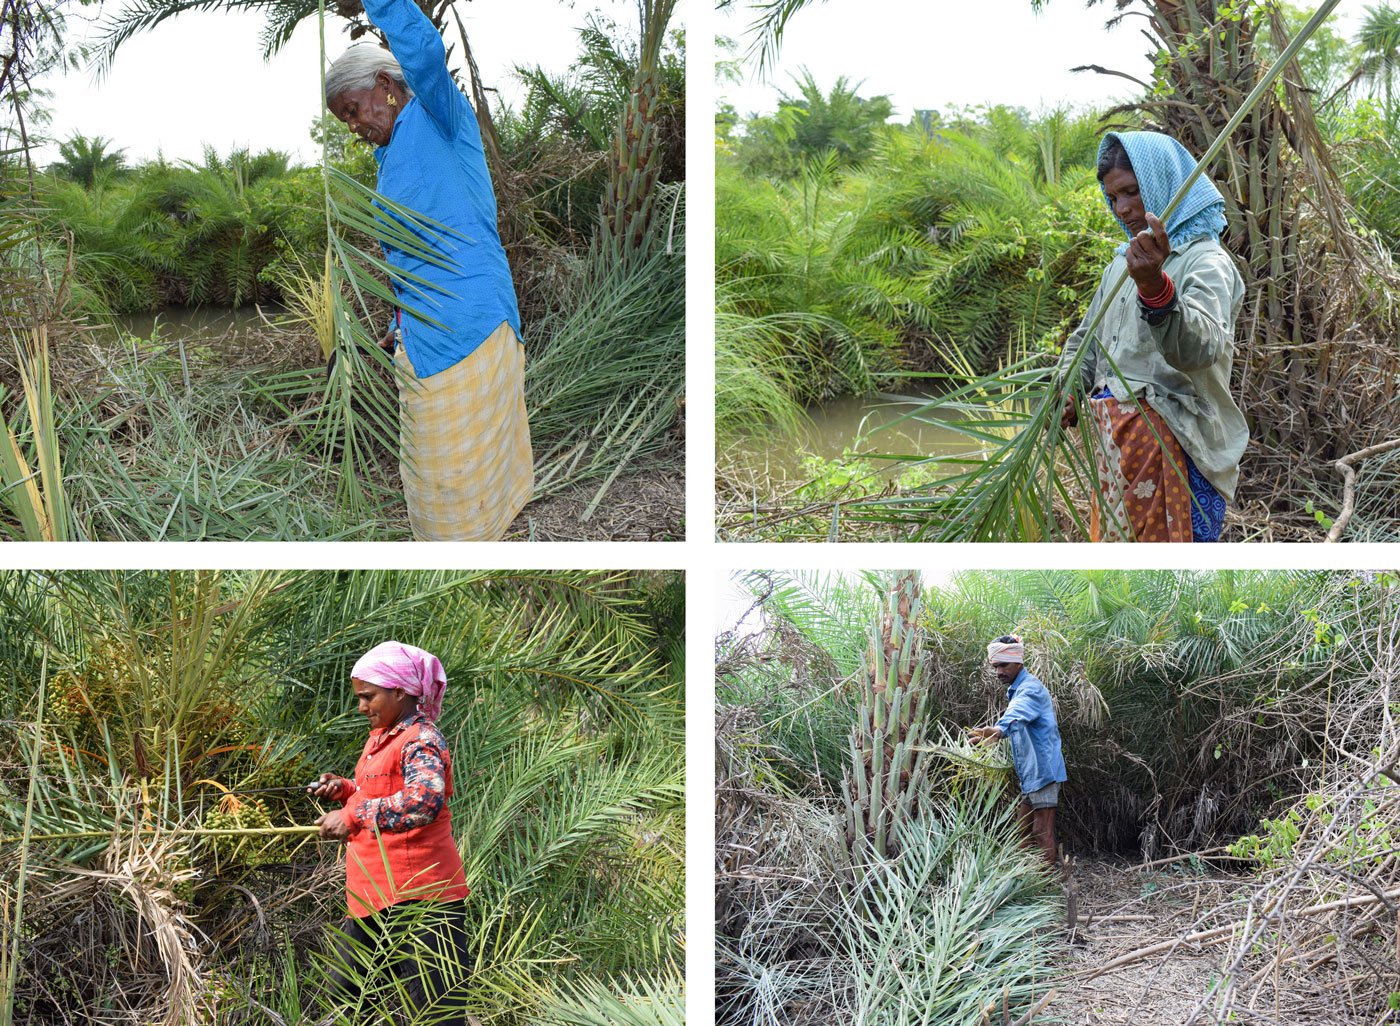 Clearing thorns from the silver date palm fronds: Neligundharashi Ramulamma (top left); Neligundharashi Yadamma (top right); Neligundharashi Sumathi  (bottom left), and Ramulu (bottom right)

